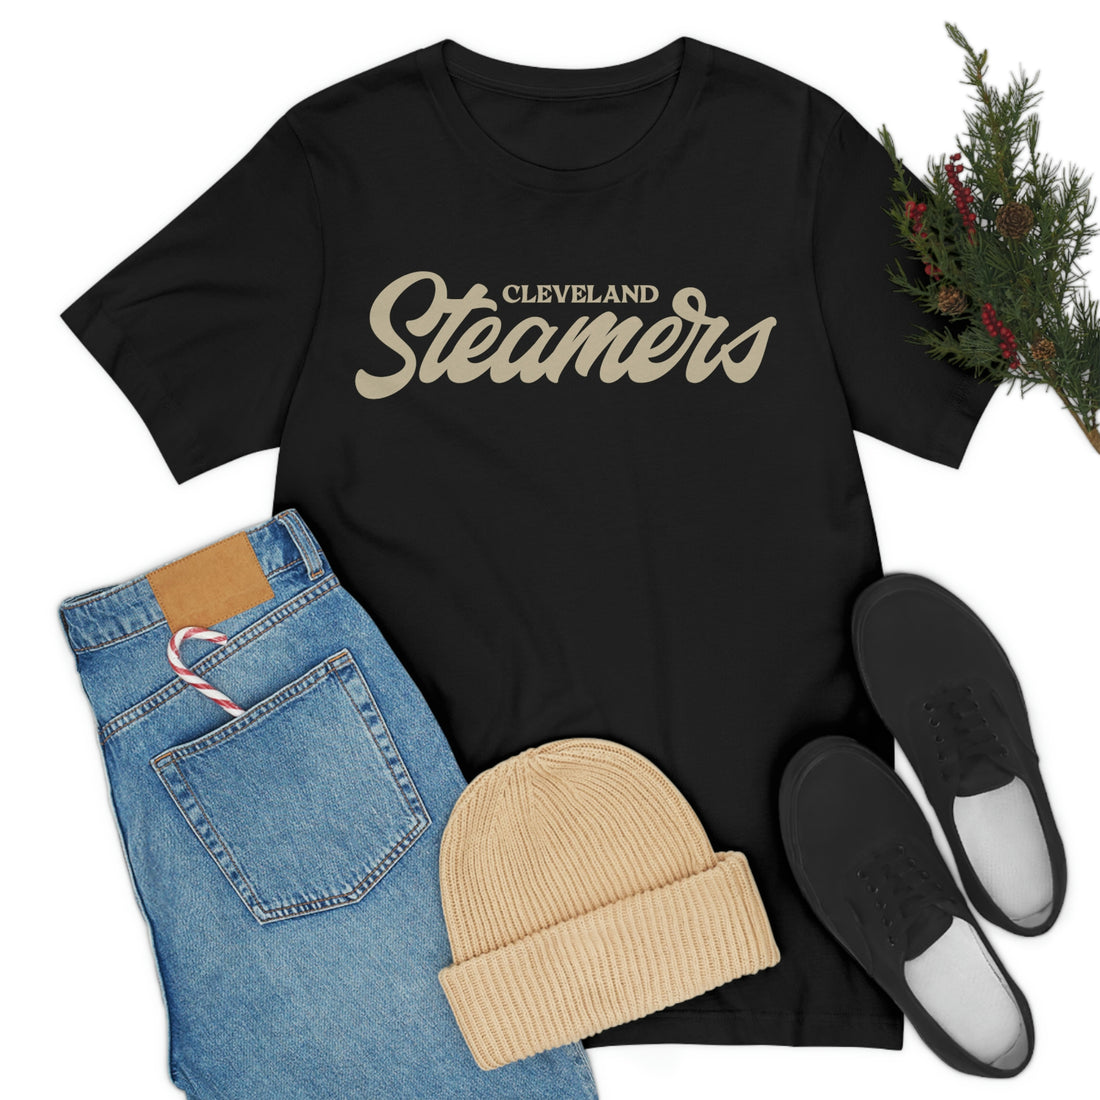 Cleveland Steamers Tee